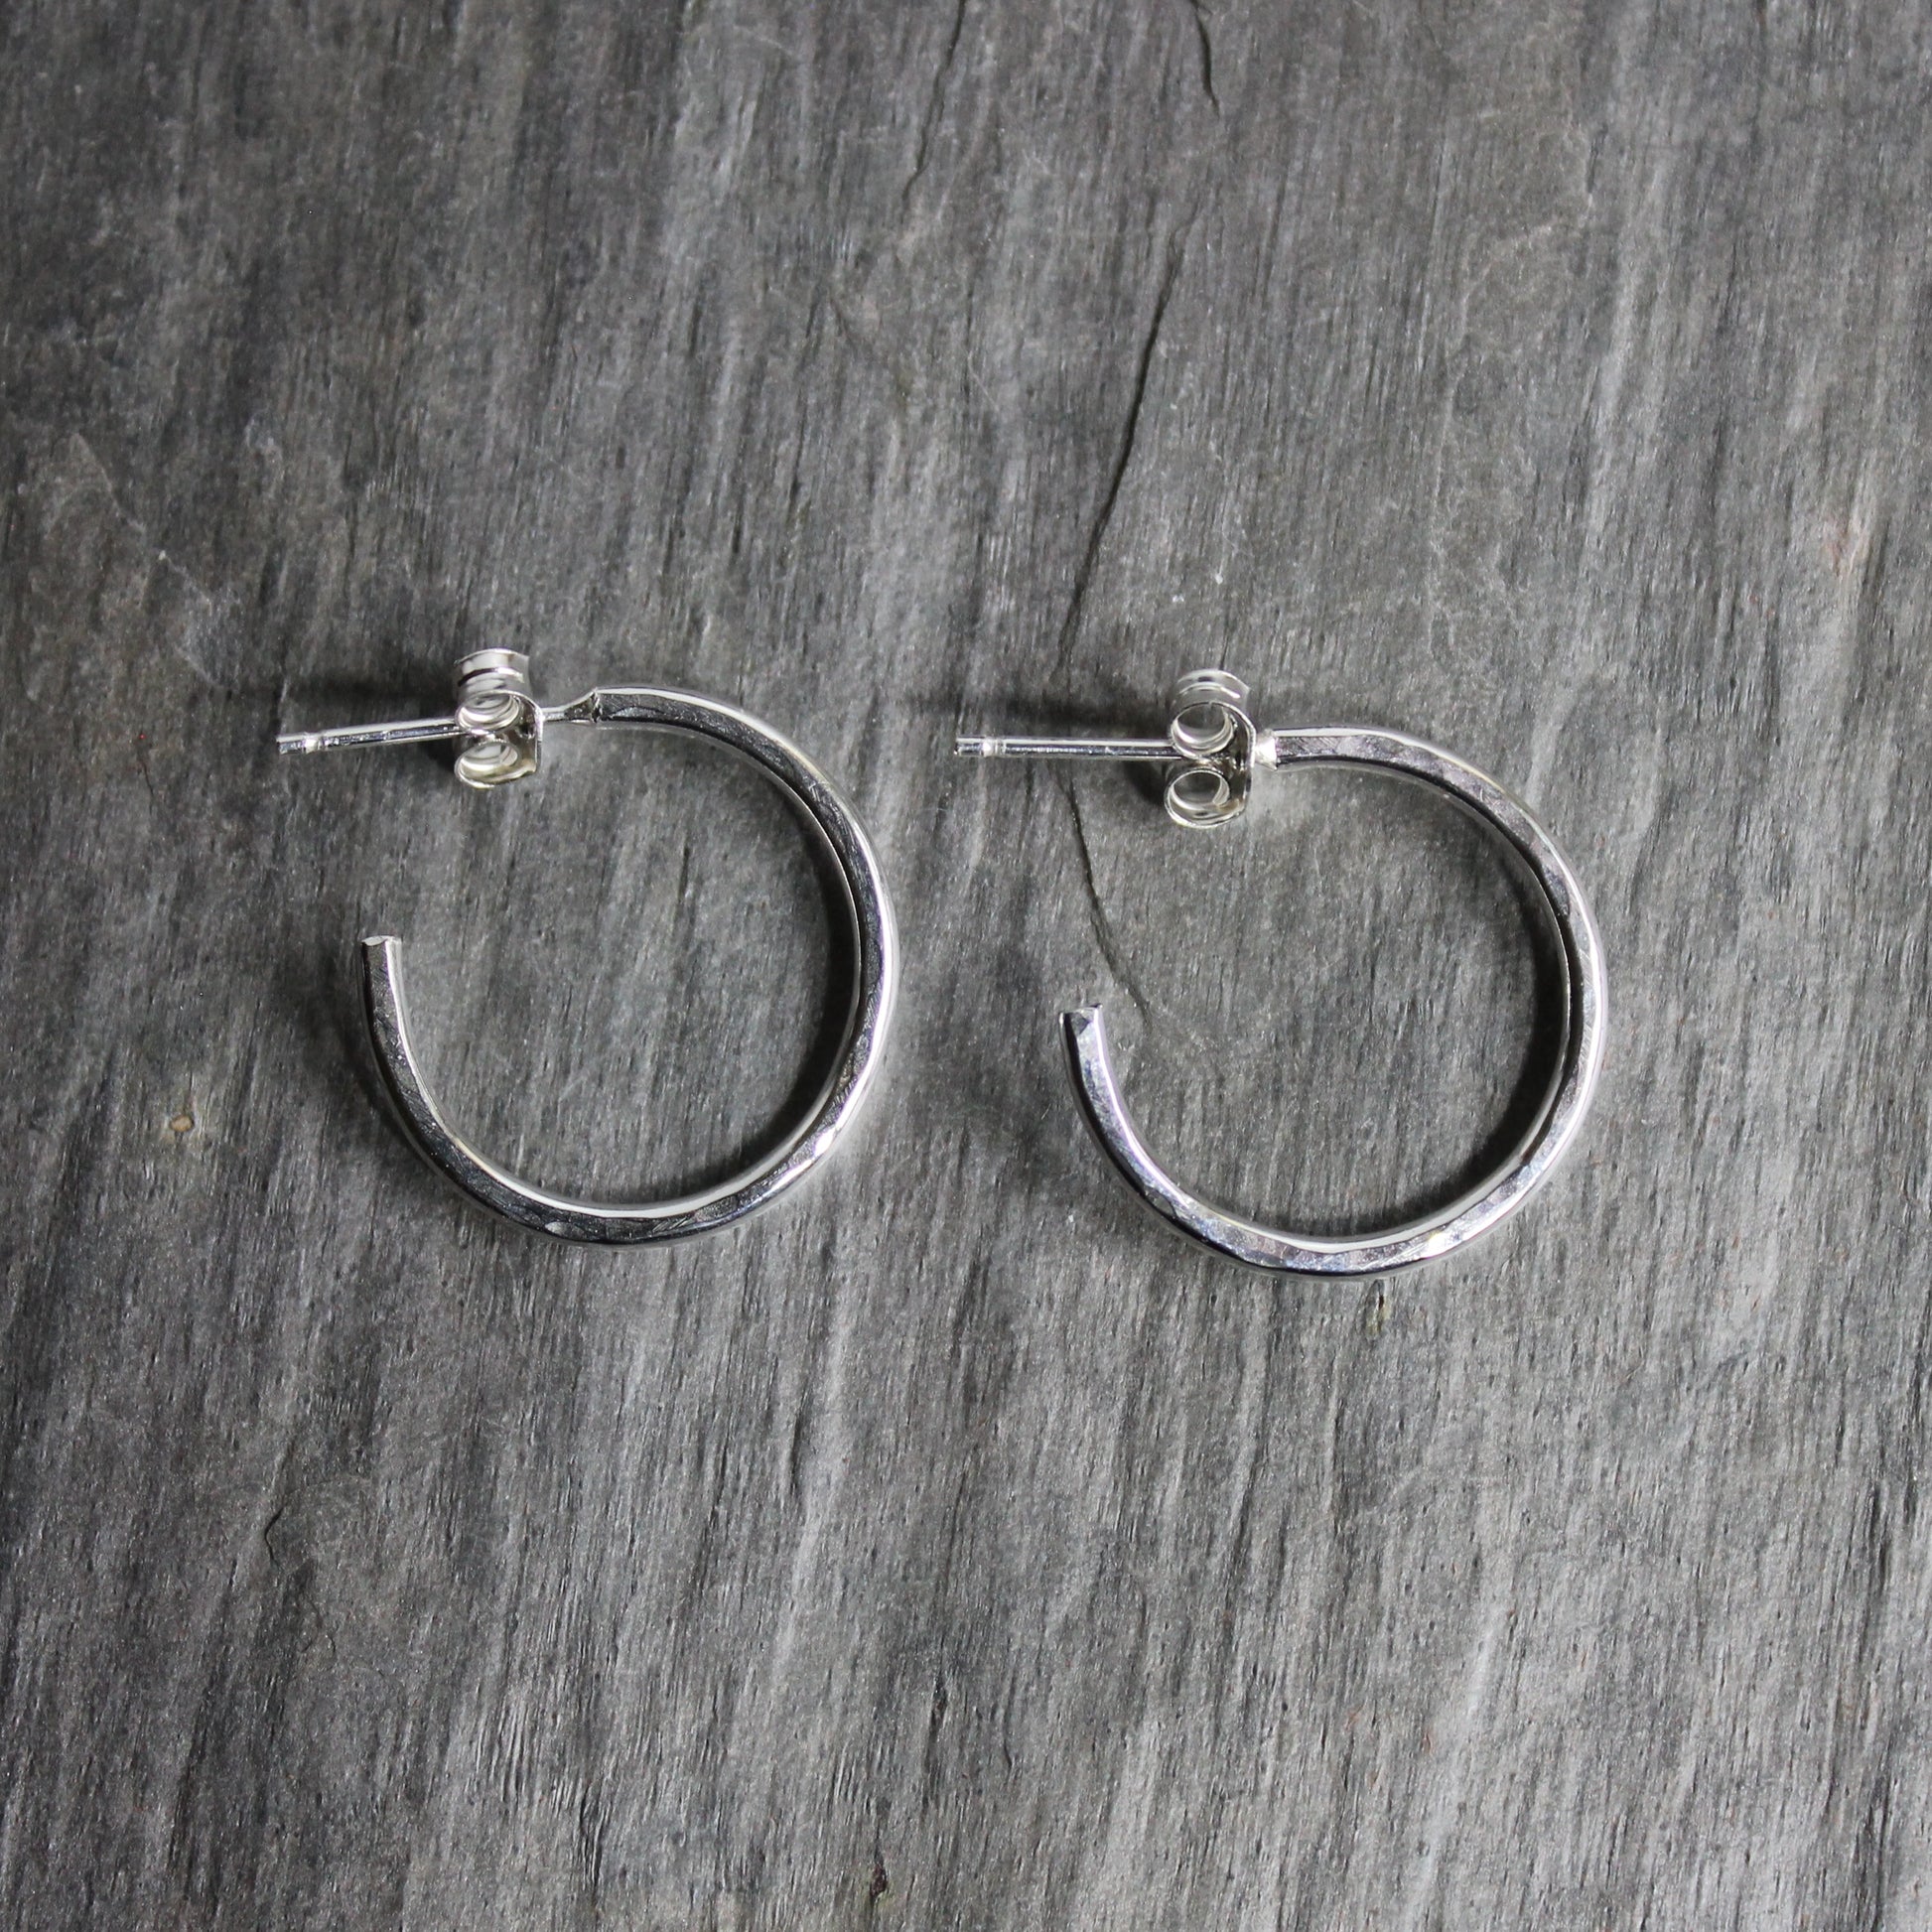 Sterling silver hammered hoops on posts approximately 3/4" in diameter with a bright finish. 